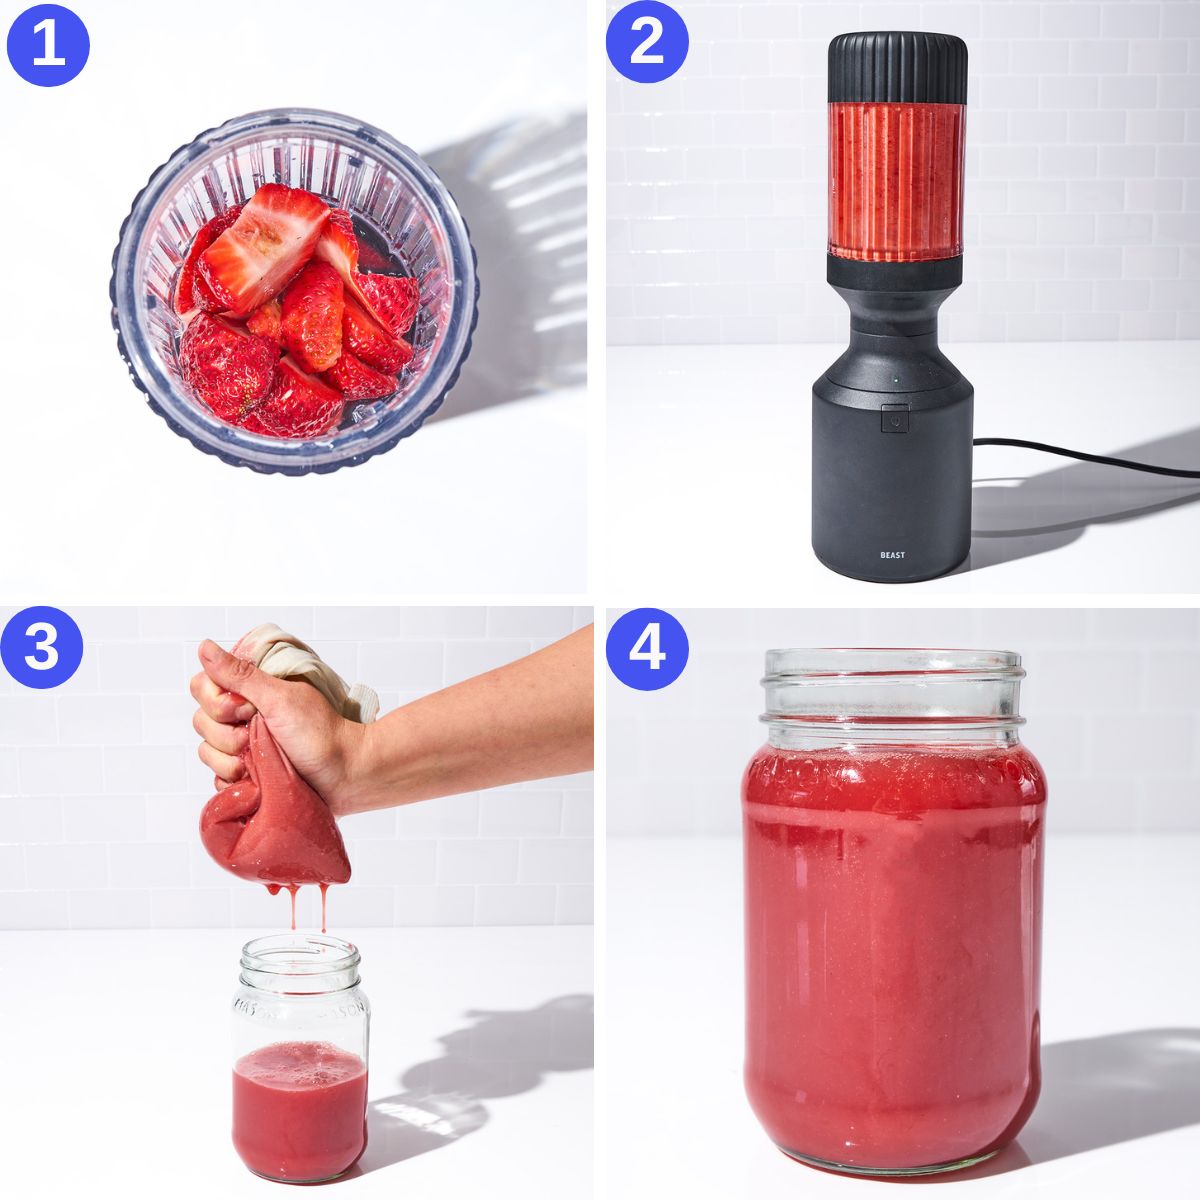 Fresh strawberry juice steps 1 to 4, blending and straining.